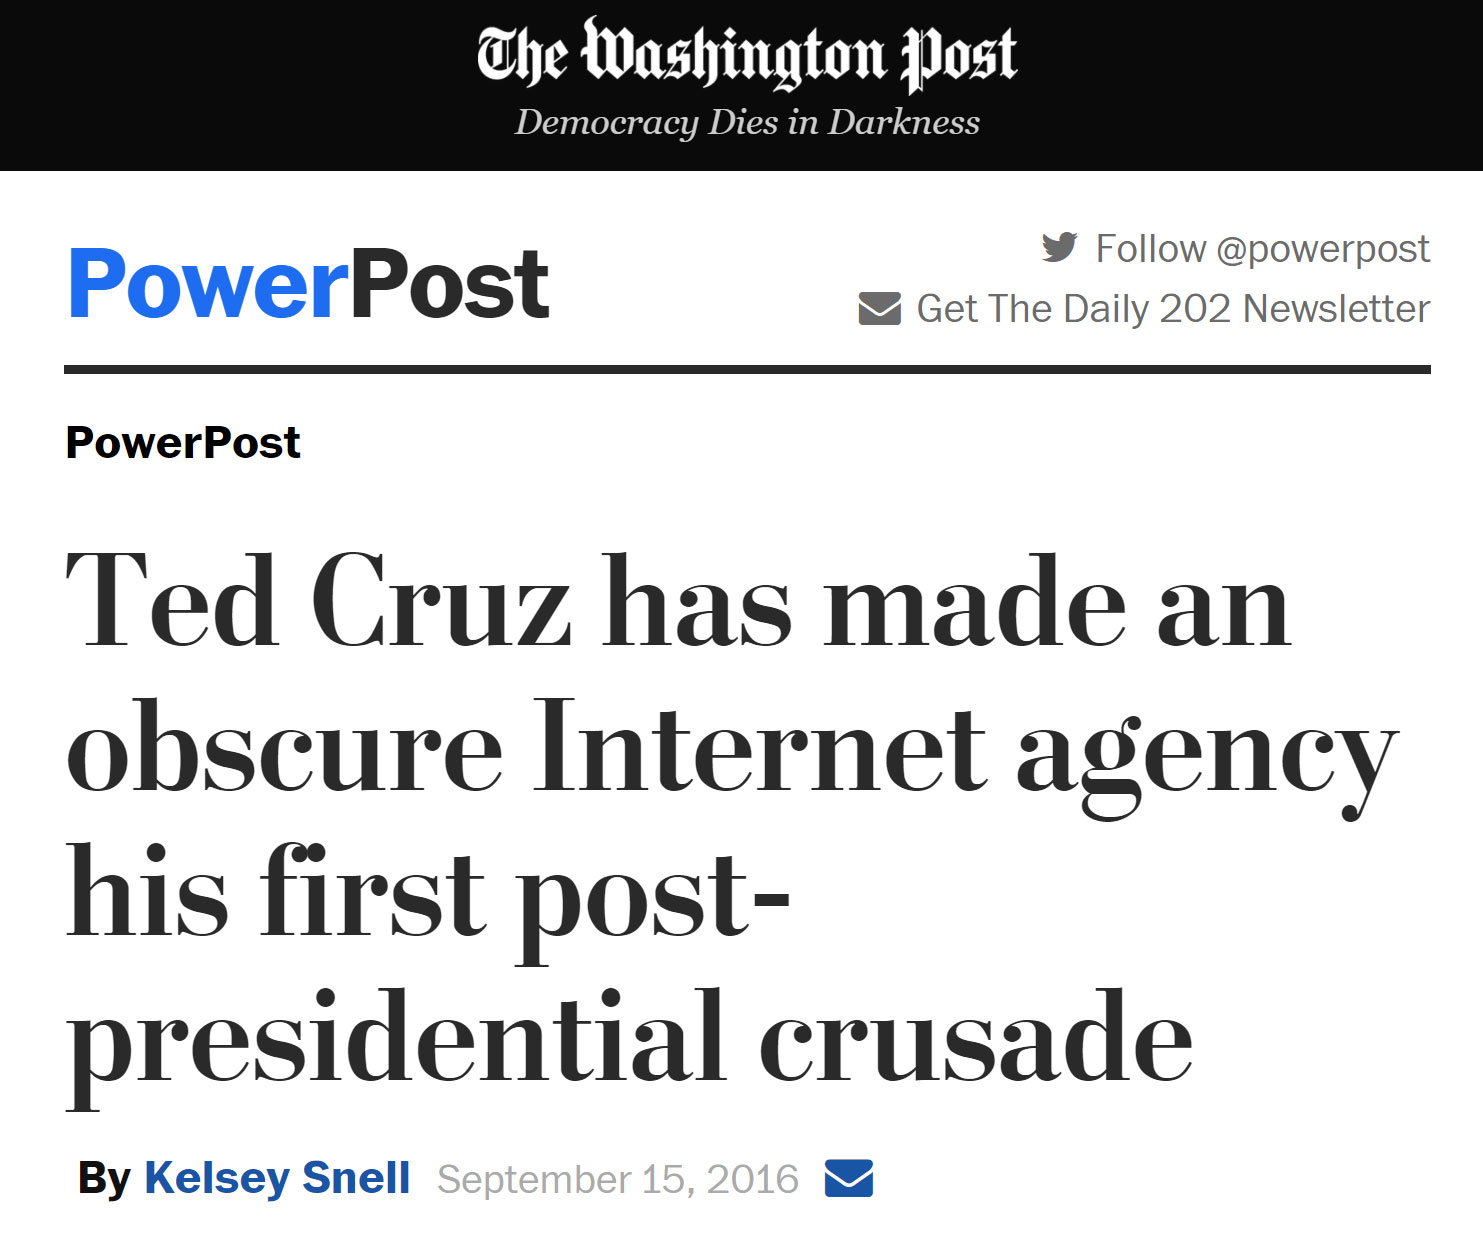 1-Ted-Cruz-has-made-an-obscure-Internet-agency-his-first-post-presidential-crusade.jpg